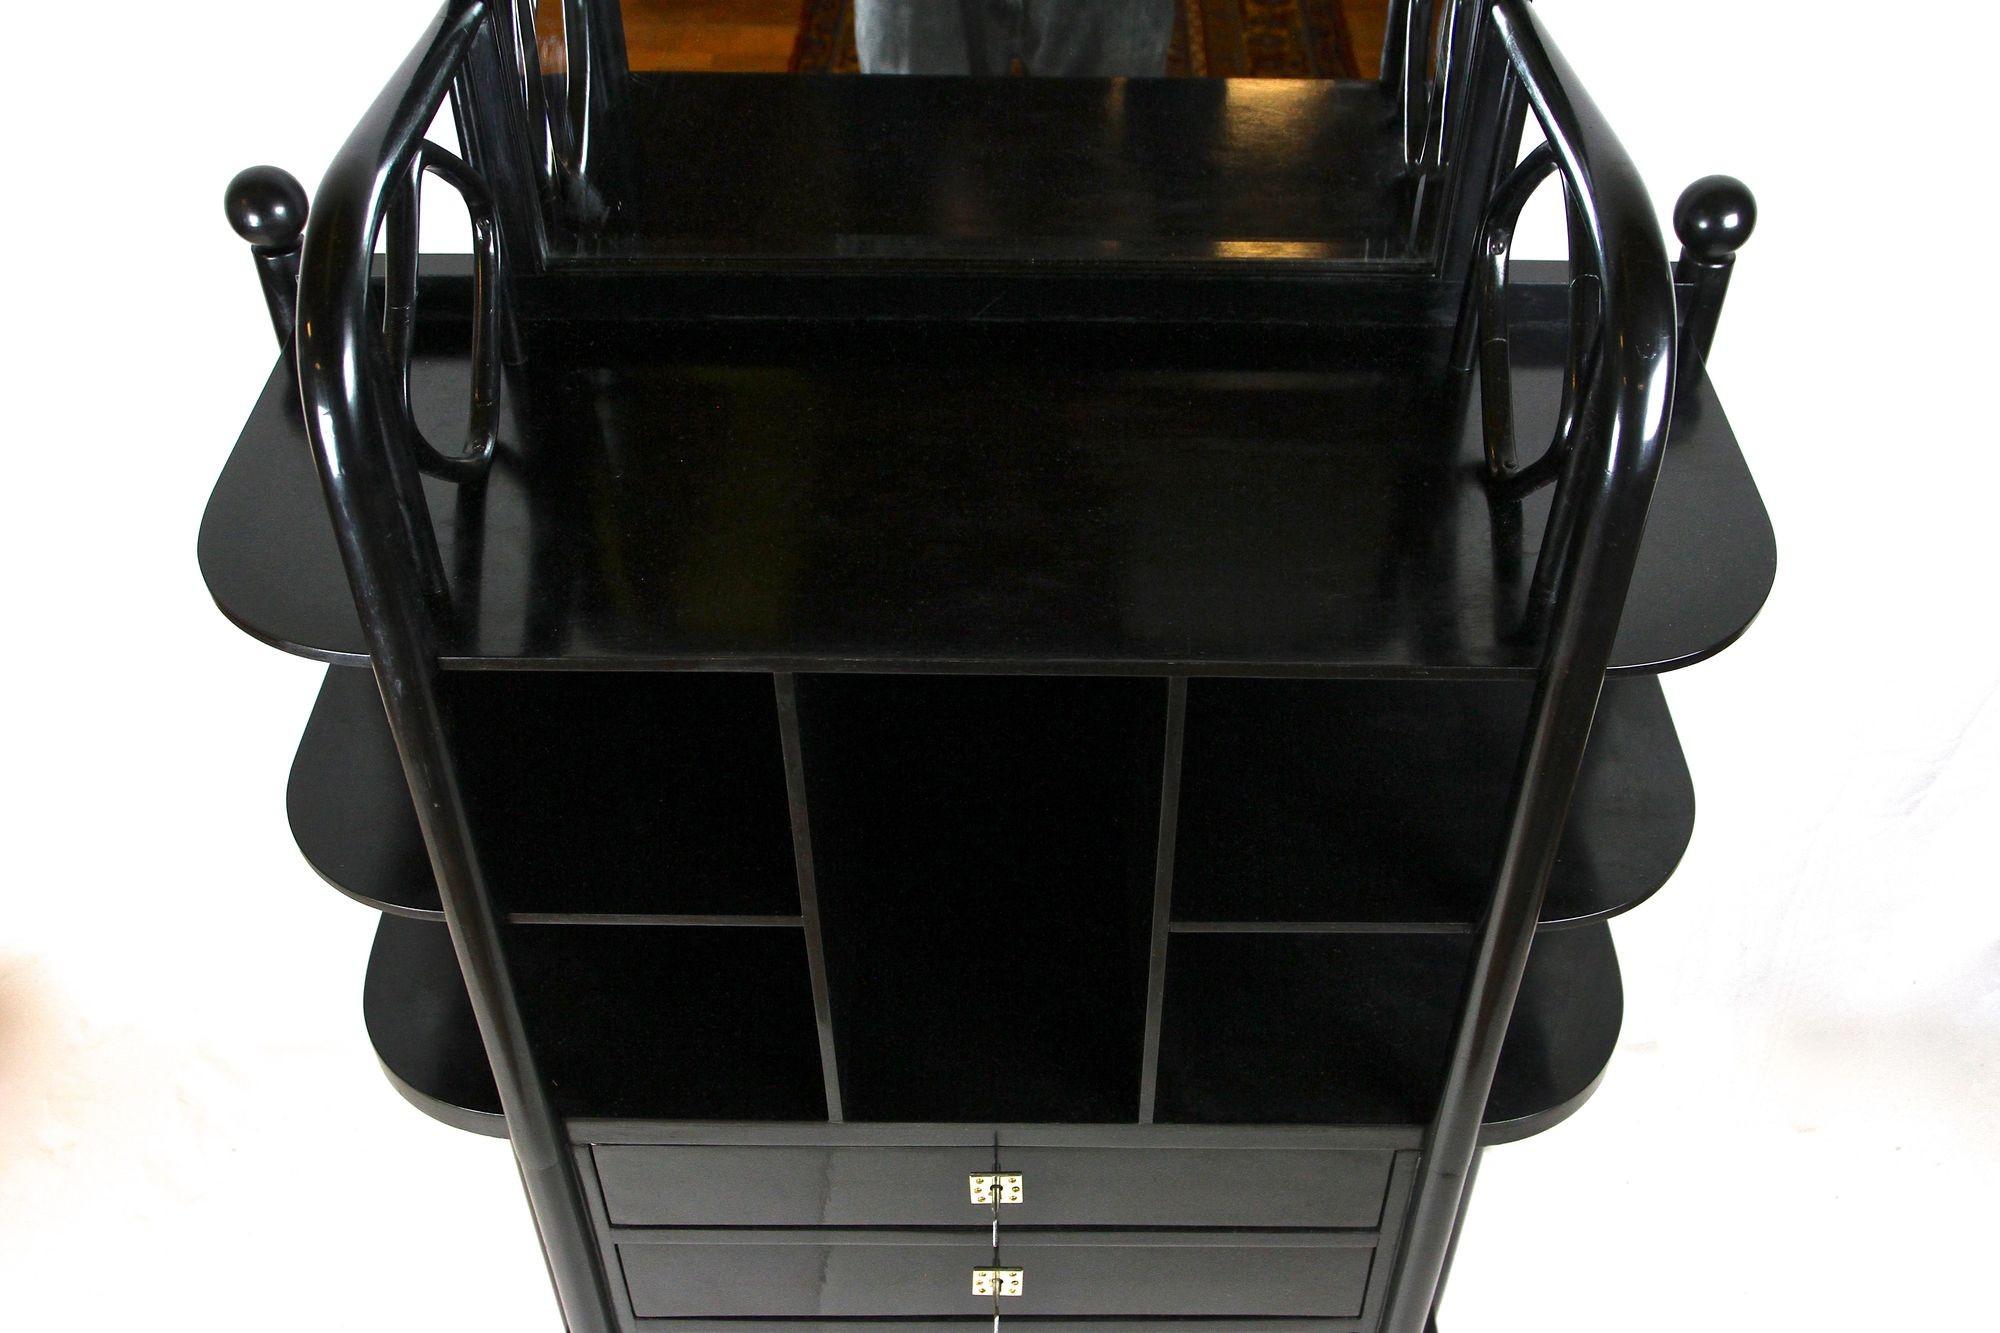 Black Art Nouveau Display Cabinet by Josef Hoffmann for Thonet, AT ca. 1905 For Sale 13